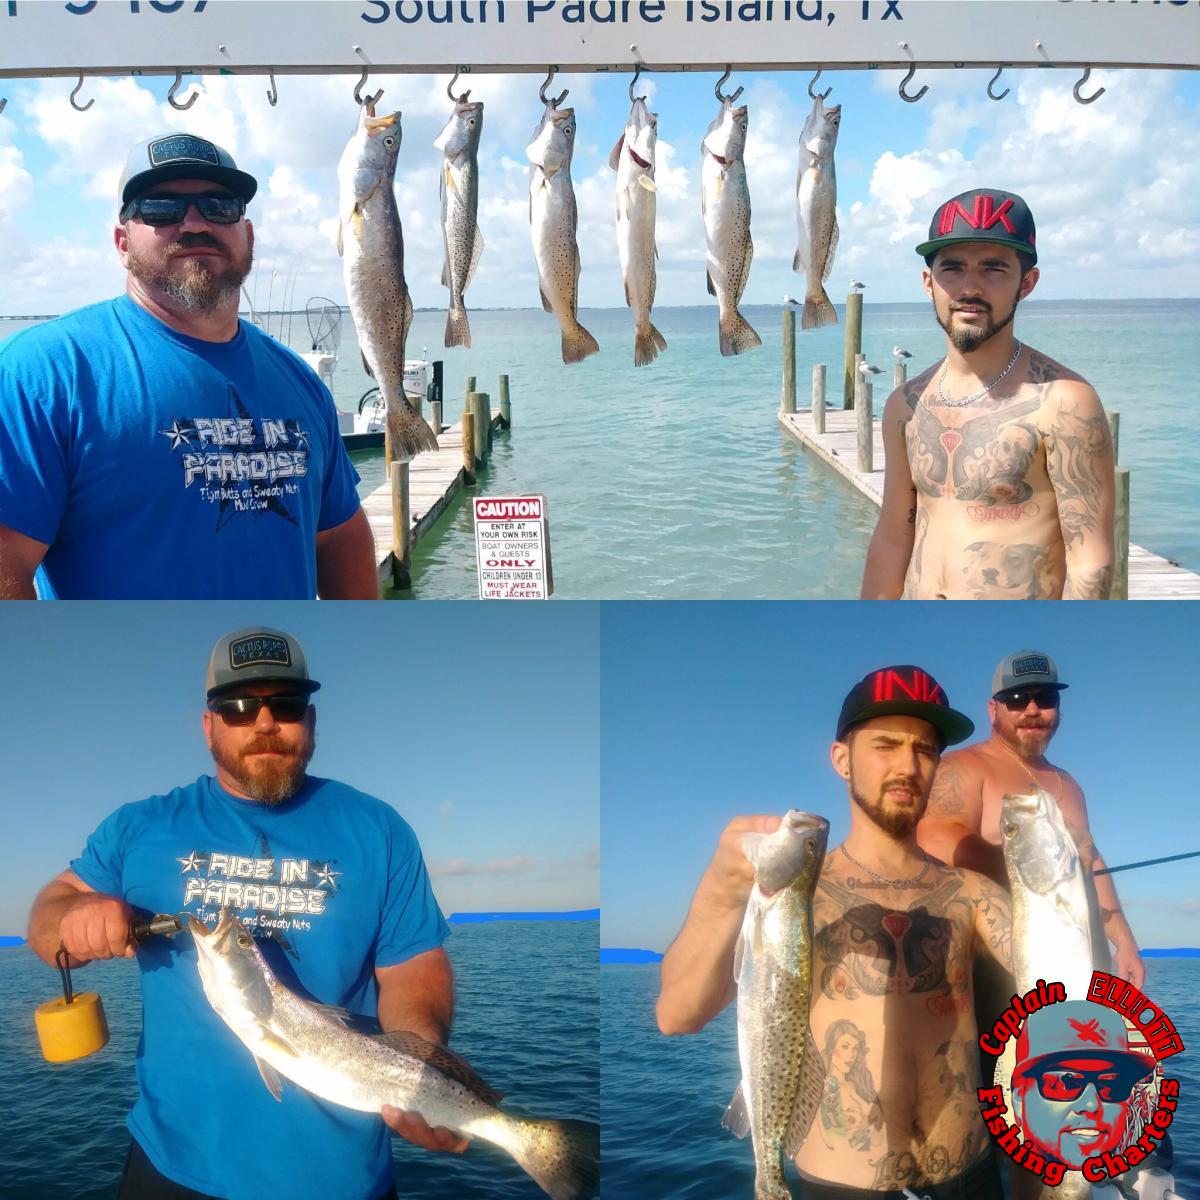 Photos | South Padre Fishing Guide